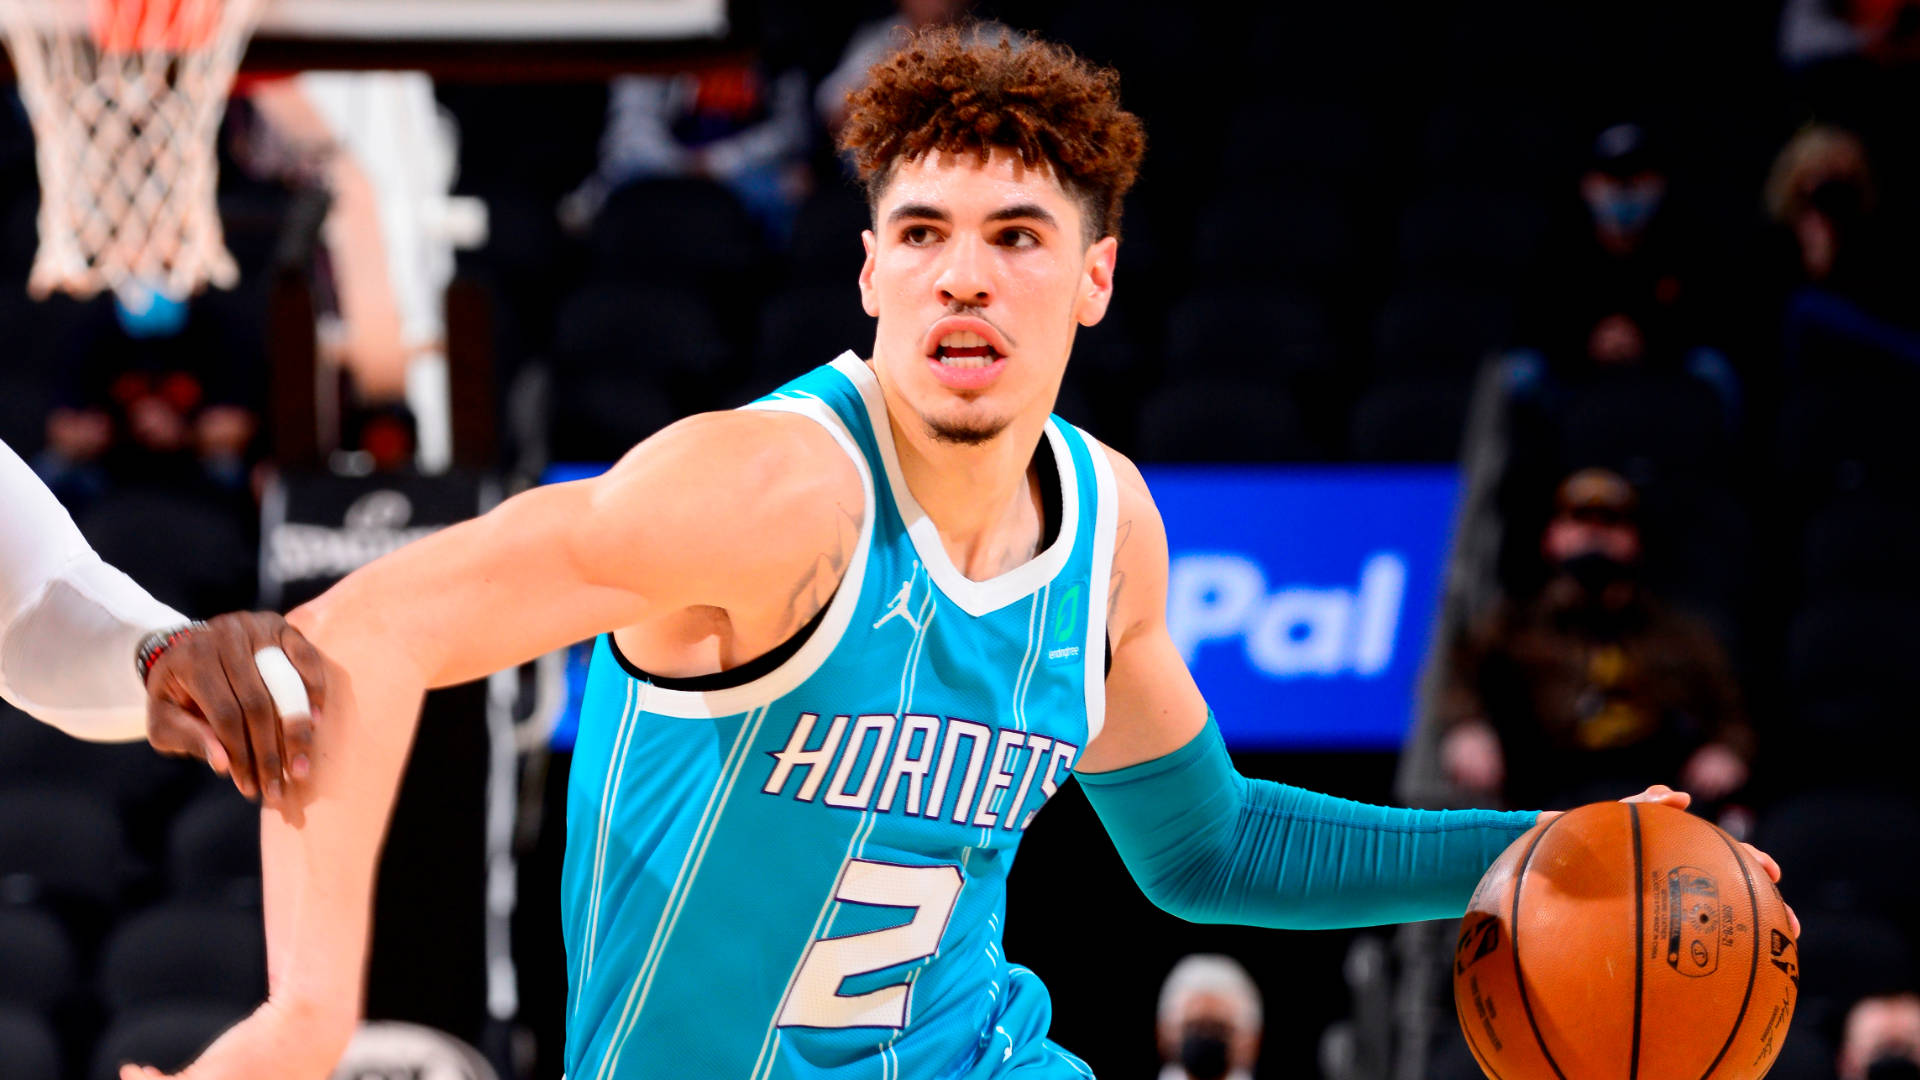 Hornets Lamelo Ball With Ball